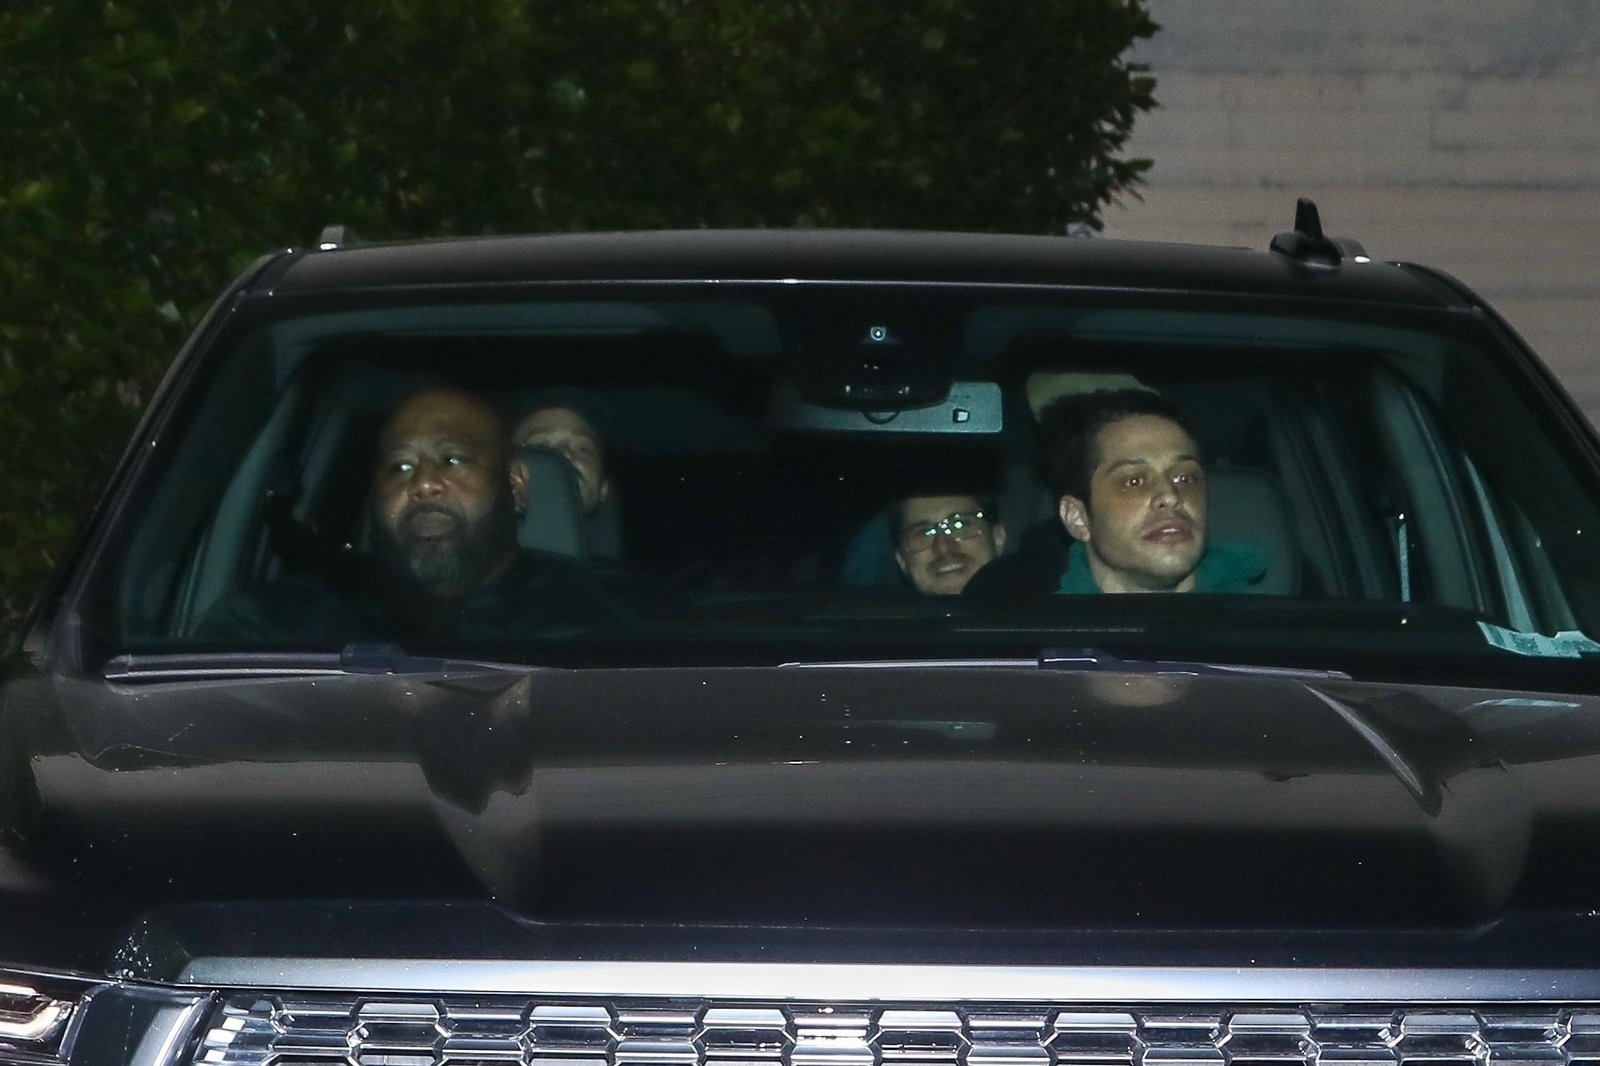 Pete Davidson crashes his SUV while leaving his stand-up comedy show